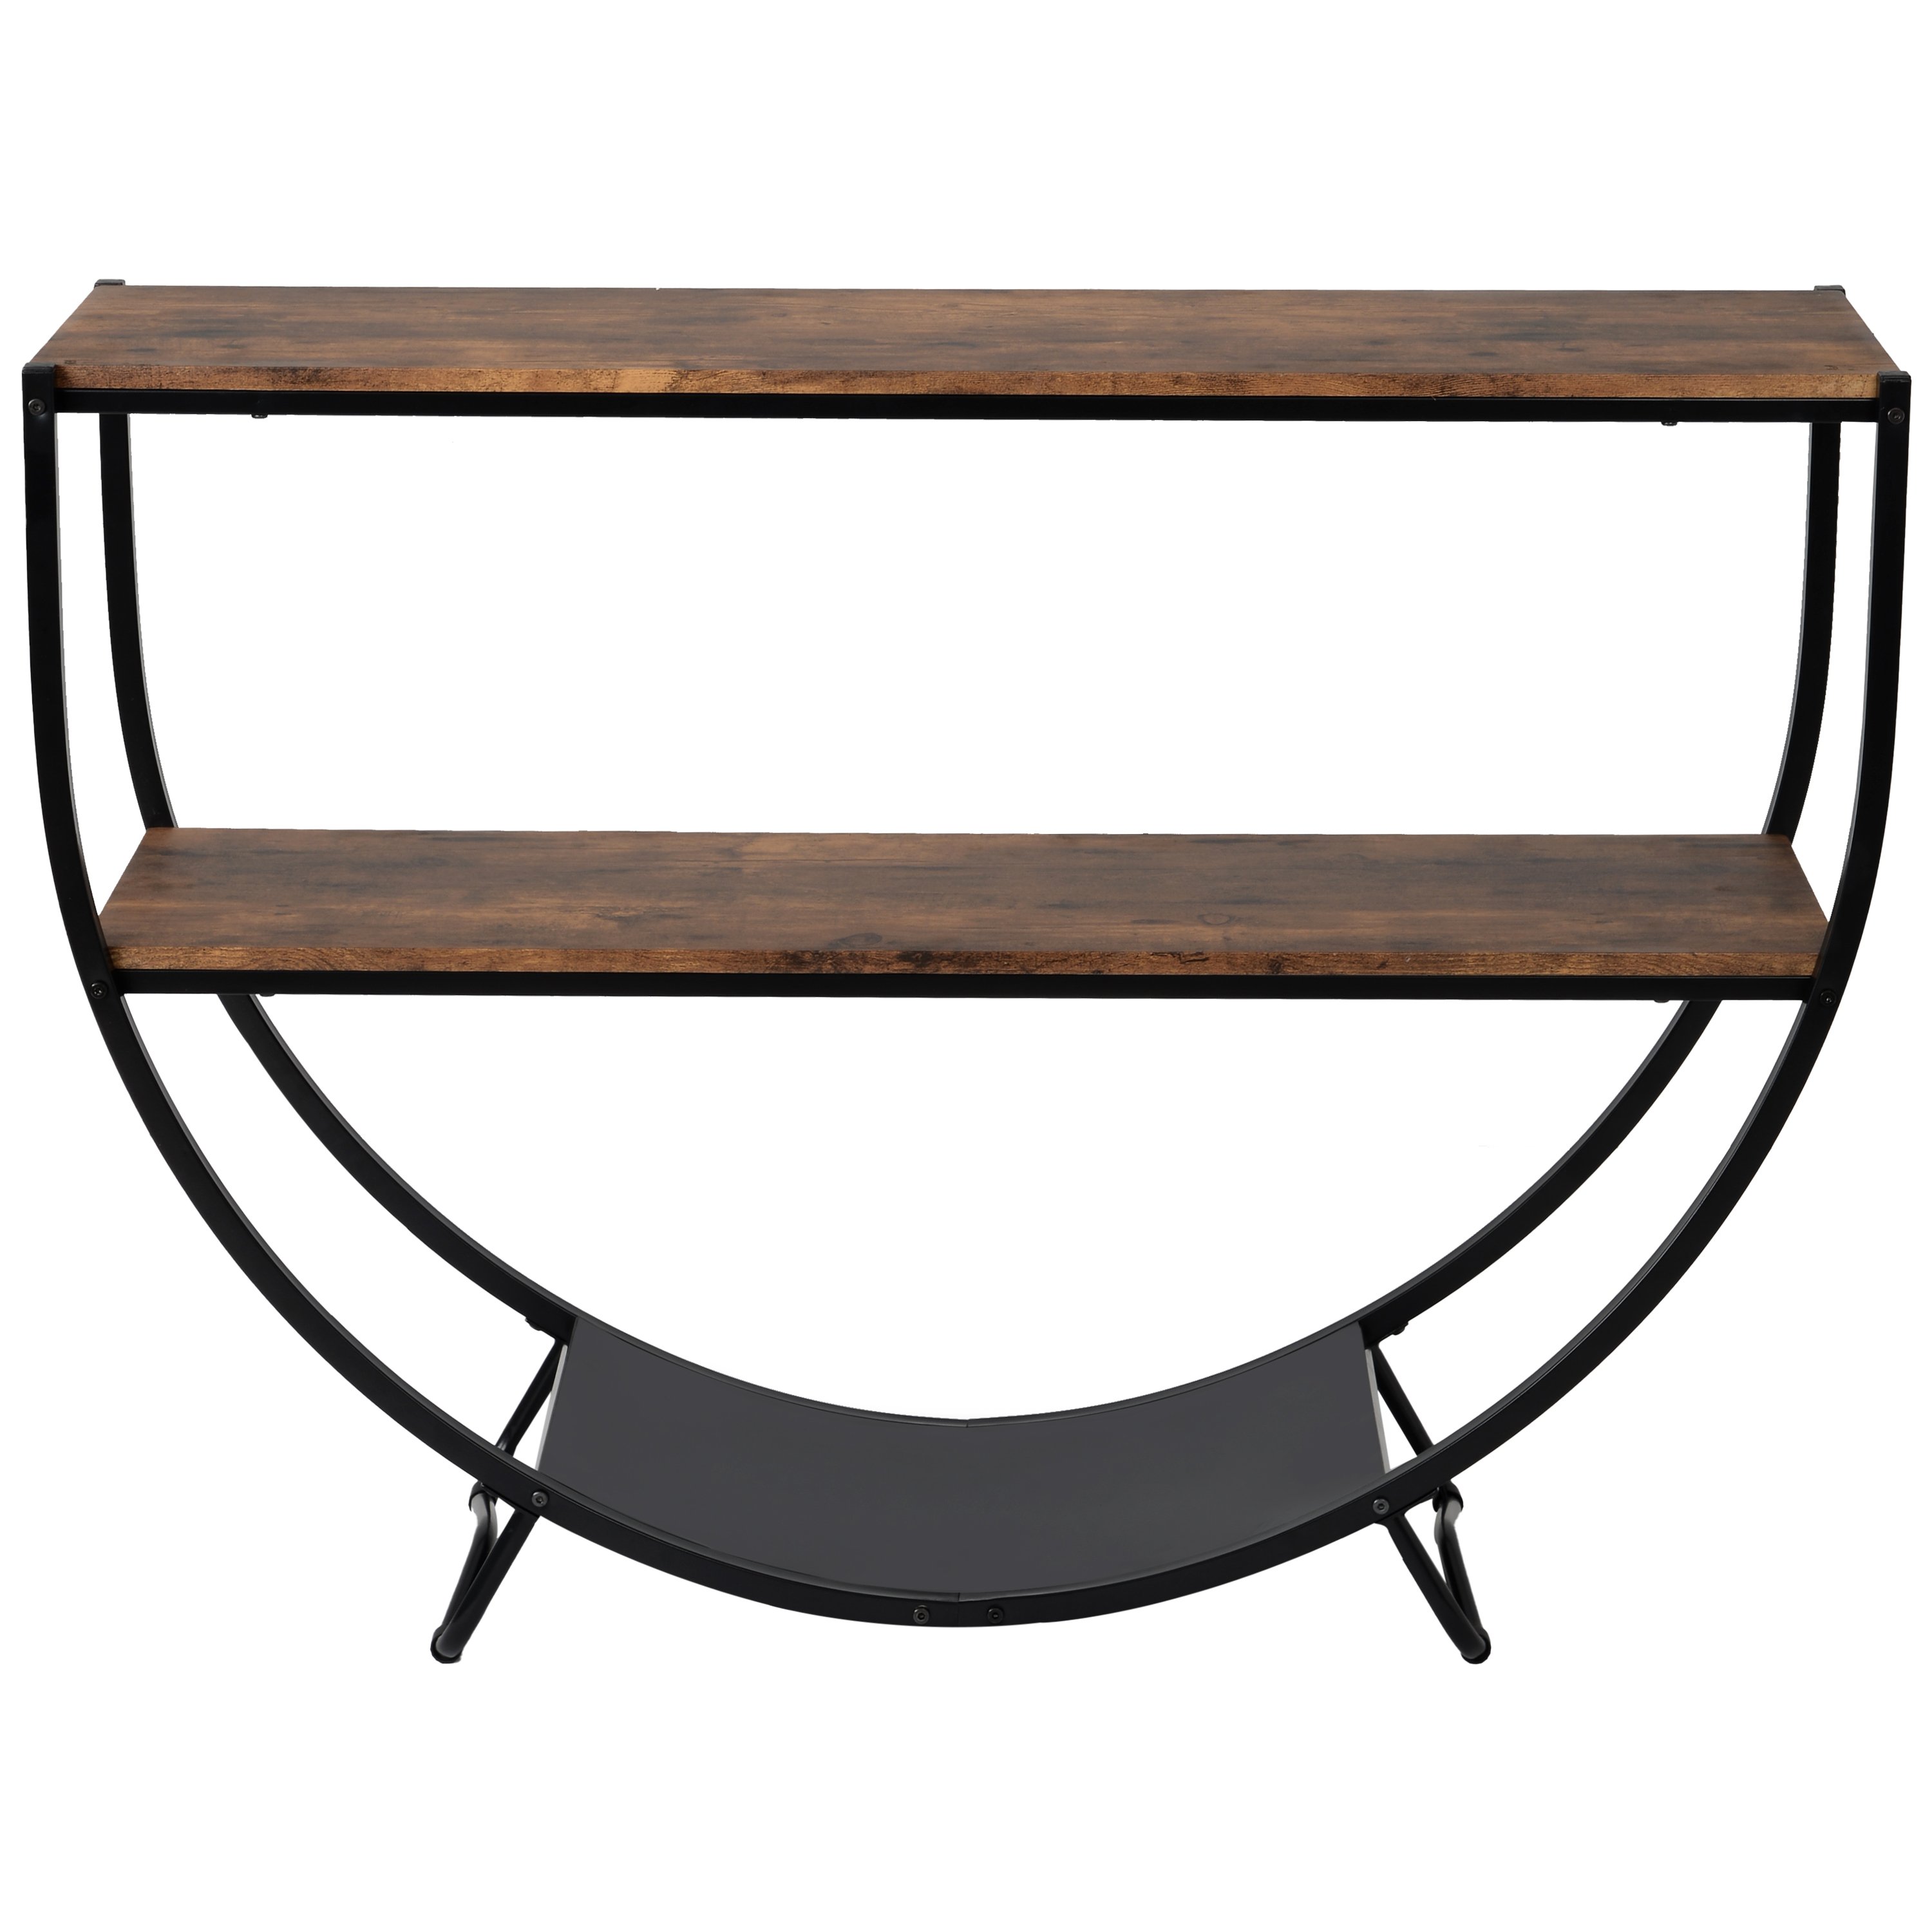 Rustic Industrial Design Shape Textured Metal Distressed Wood Console Table (Rustic Brown)-CASAINC